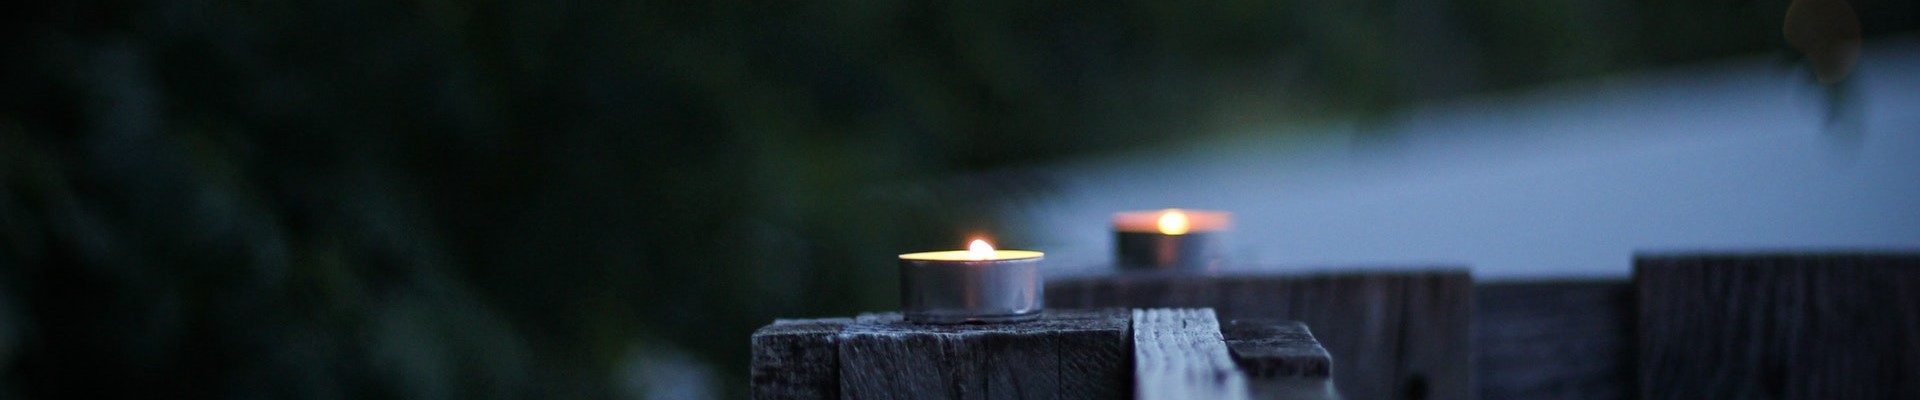 image of candles on a railing